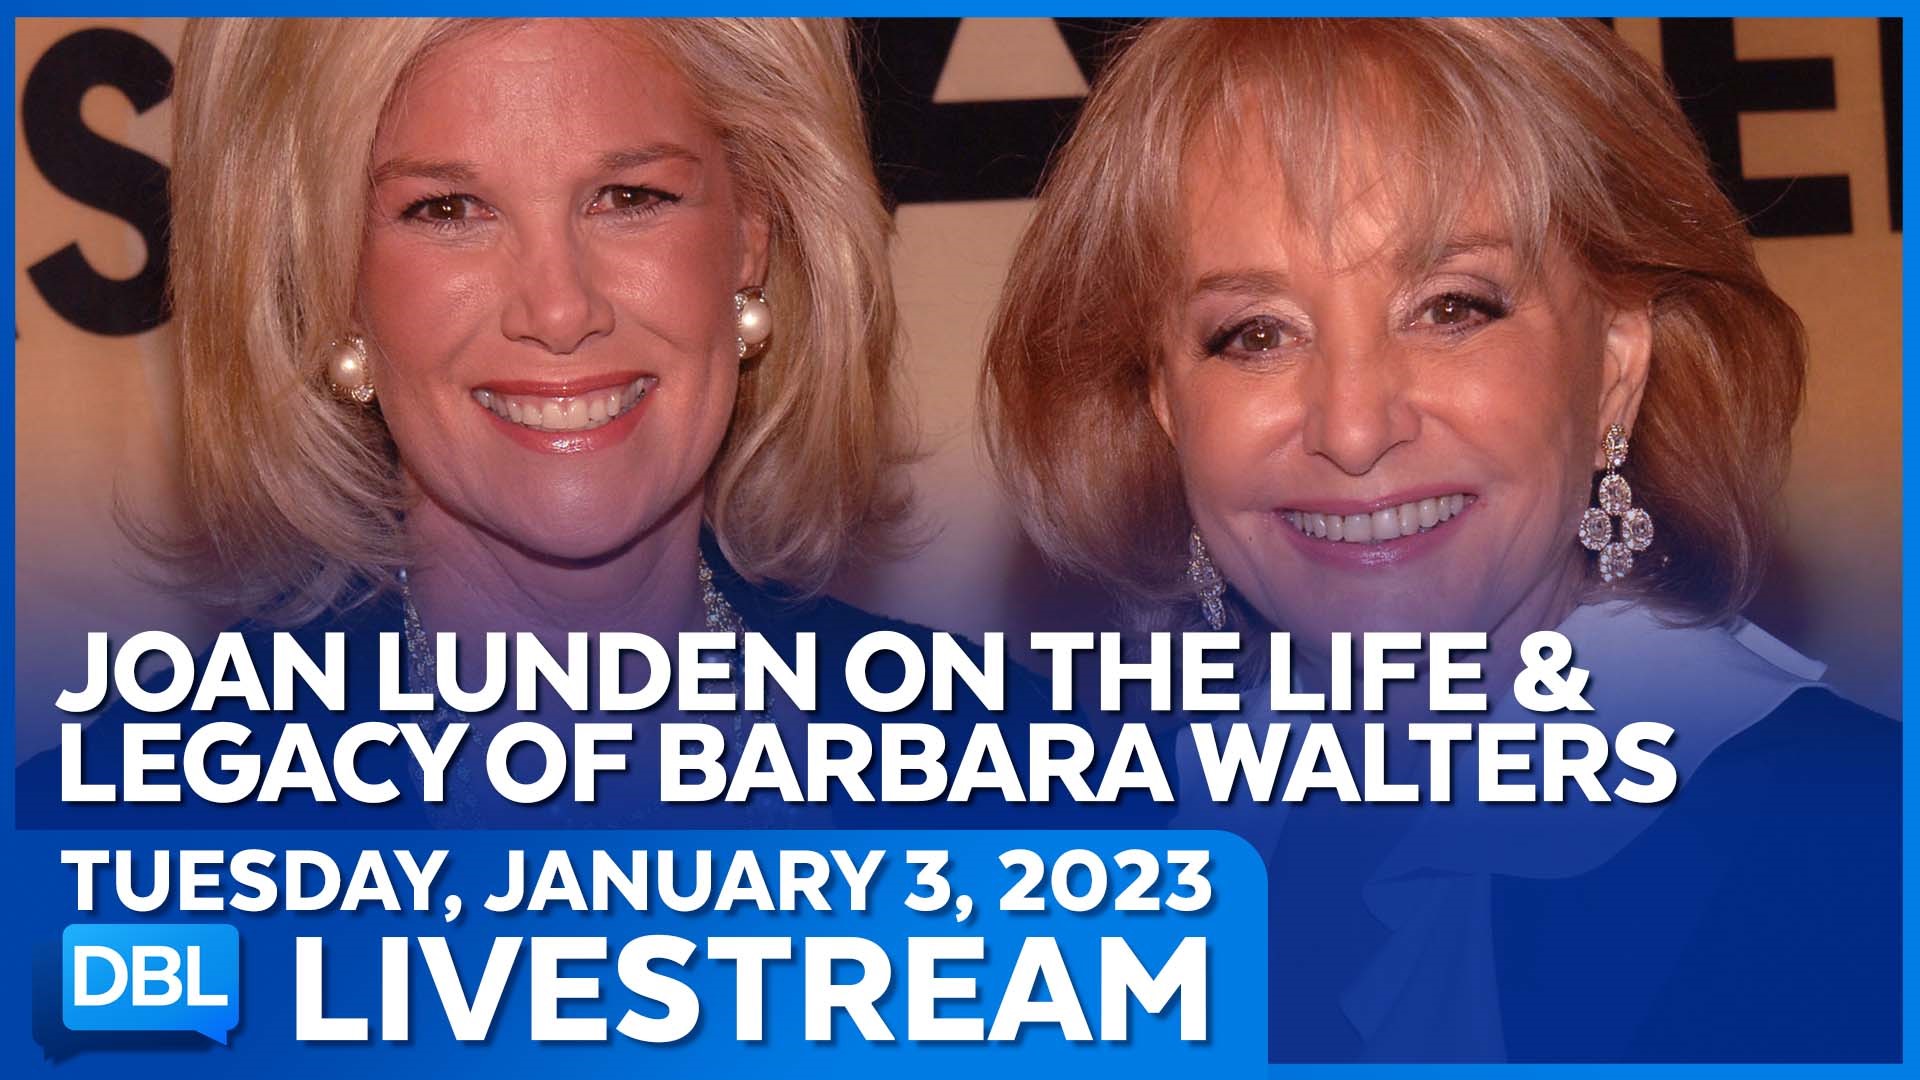 Dr. Kohli discusses Buffalo Bills player Damar Hamlin's on-field collapse; Joan Lunden joins to talk the life & legacy of Barbara Walters; New Year Resolutions.